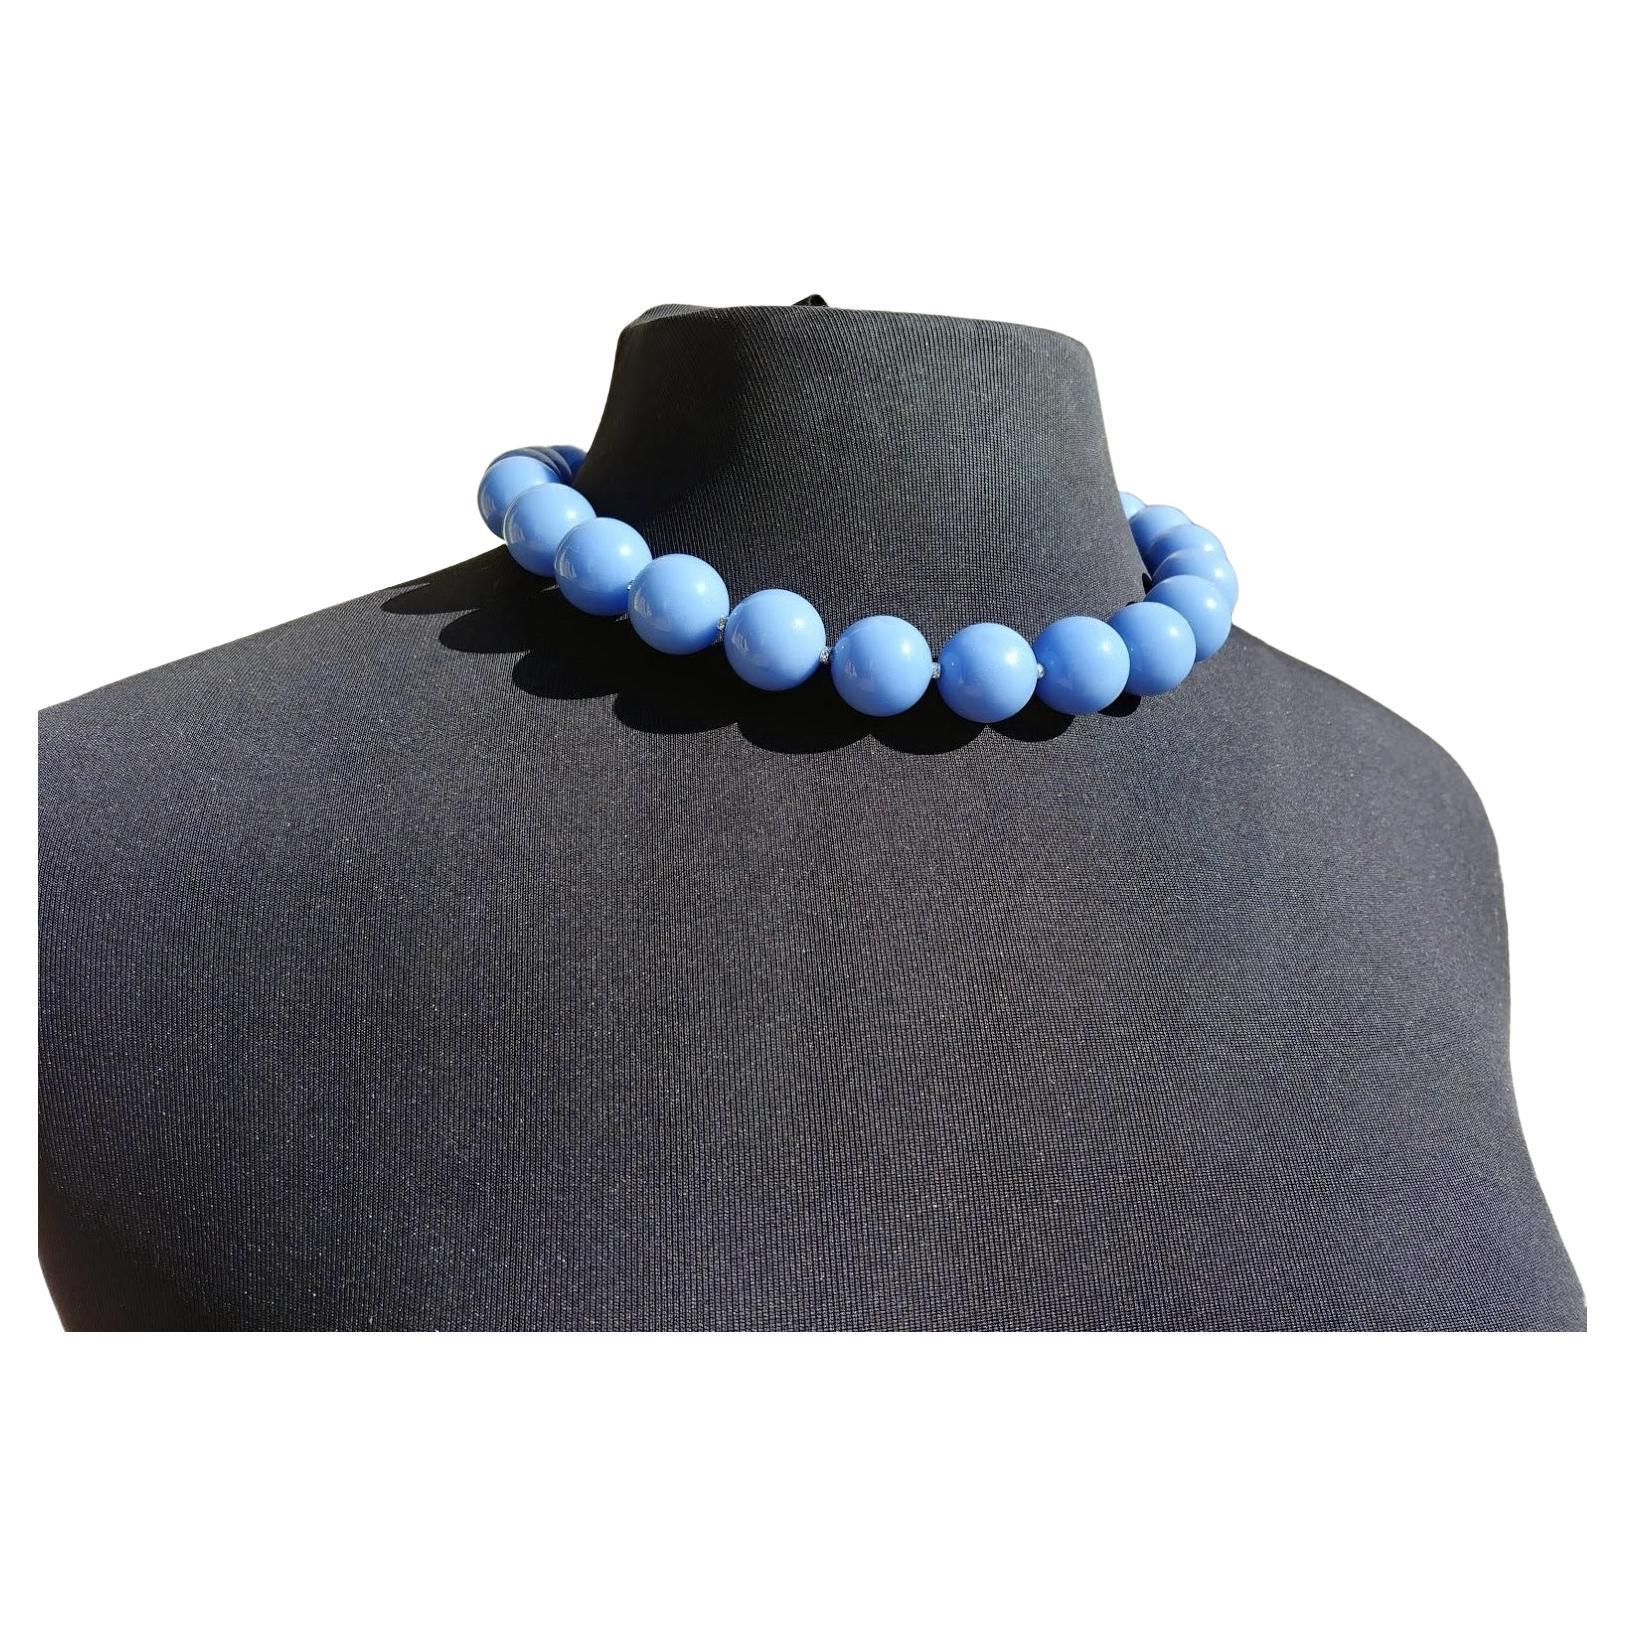 The length of the necklace is 18 inches (45 cm). The size of the smooth round beads is 16 mm.
Beads are a very soft blue color. 
Aragonite is a carbonate mineral, one of the three most common naturally occurring crystal forms of calcium carbonate.